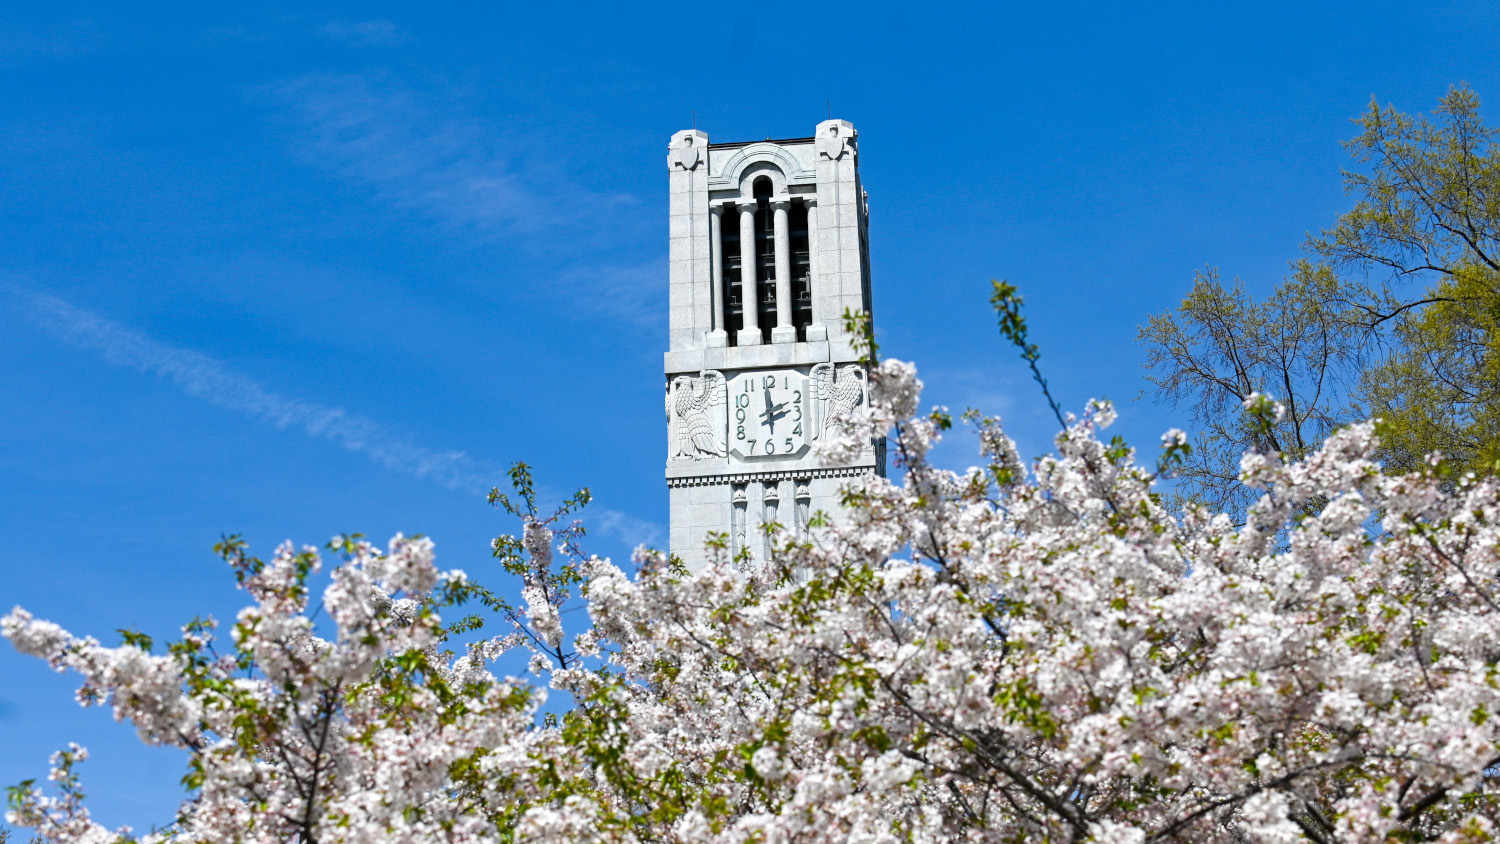 View of NC State bell tower over a tree-line